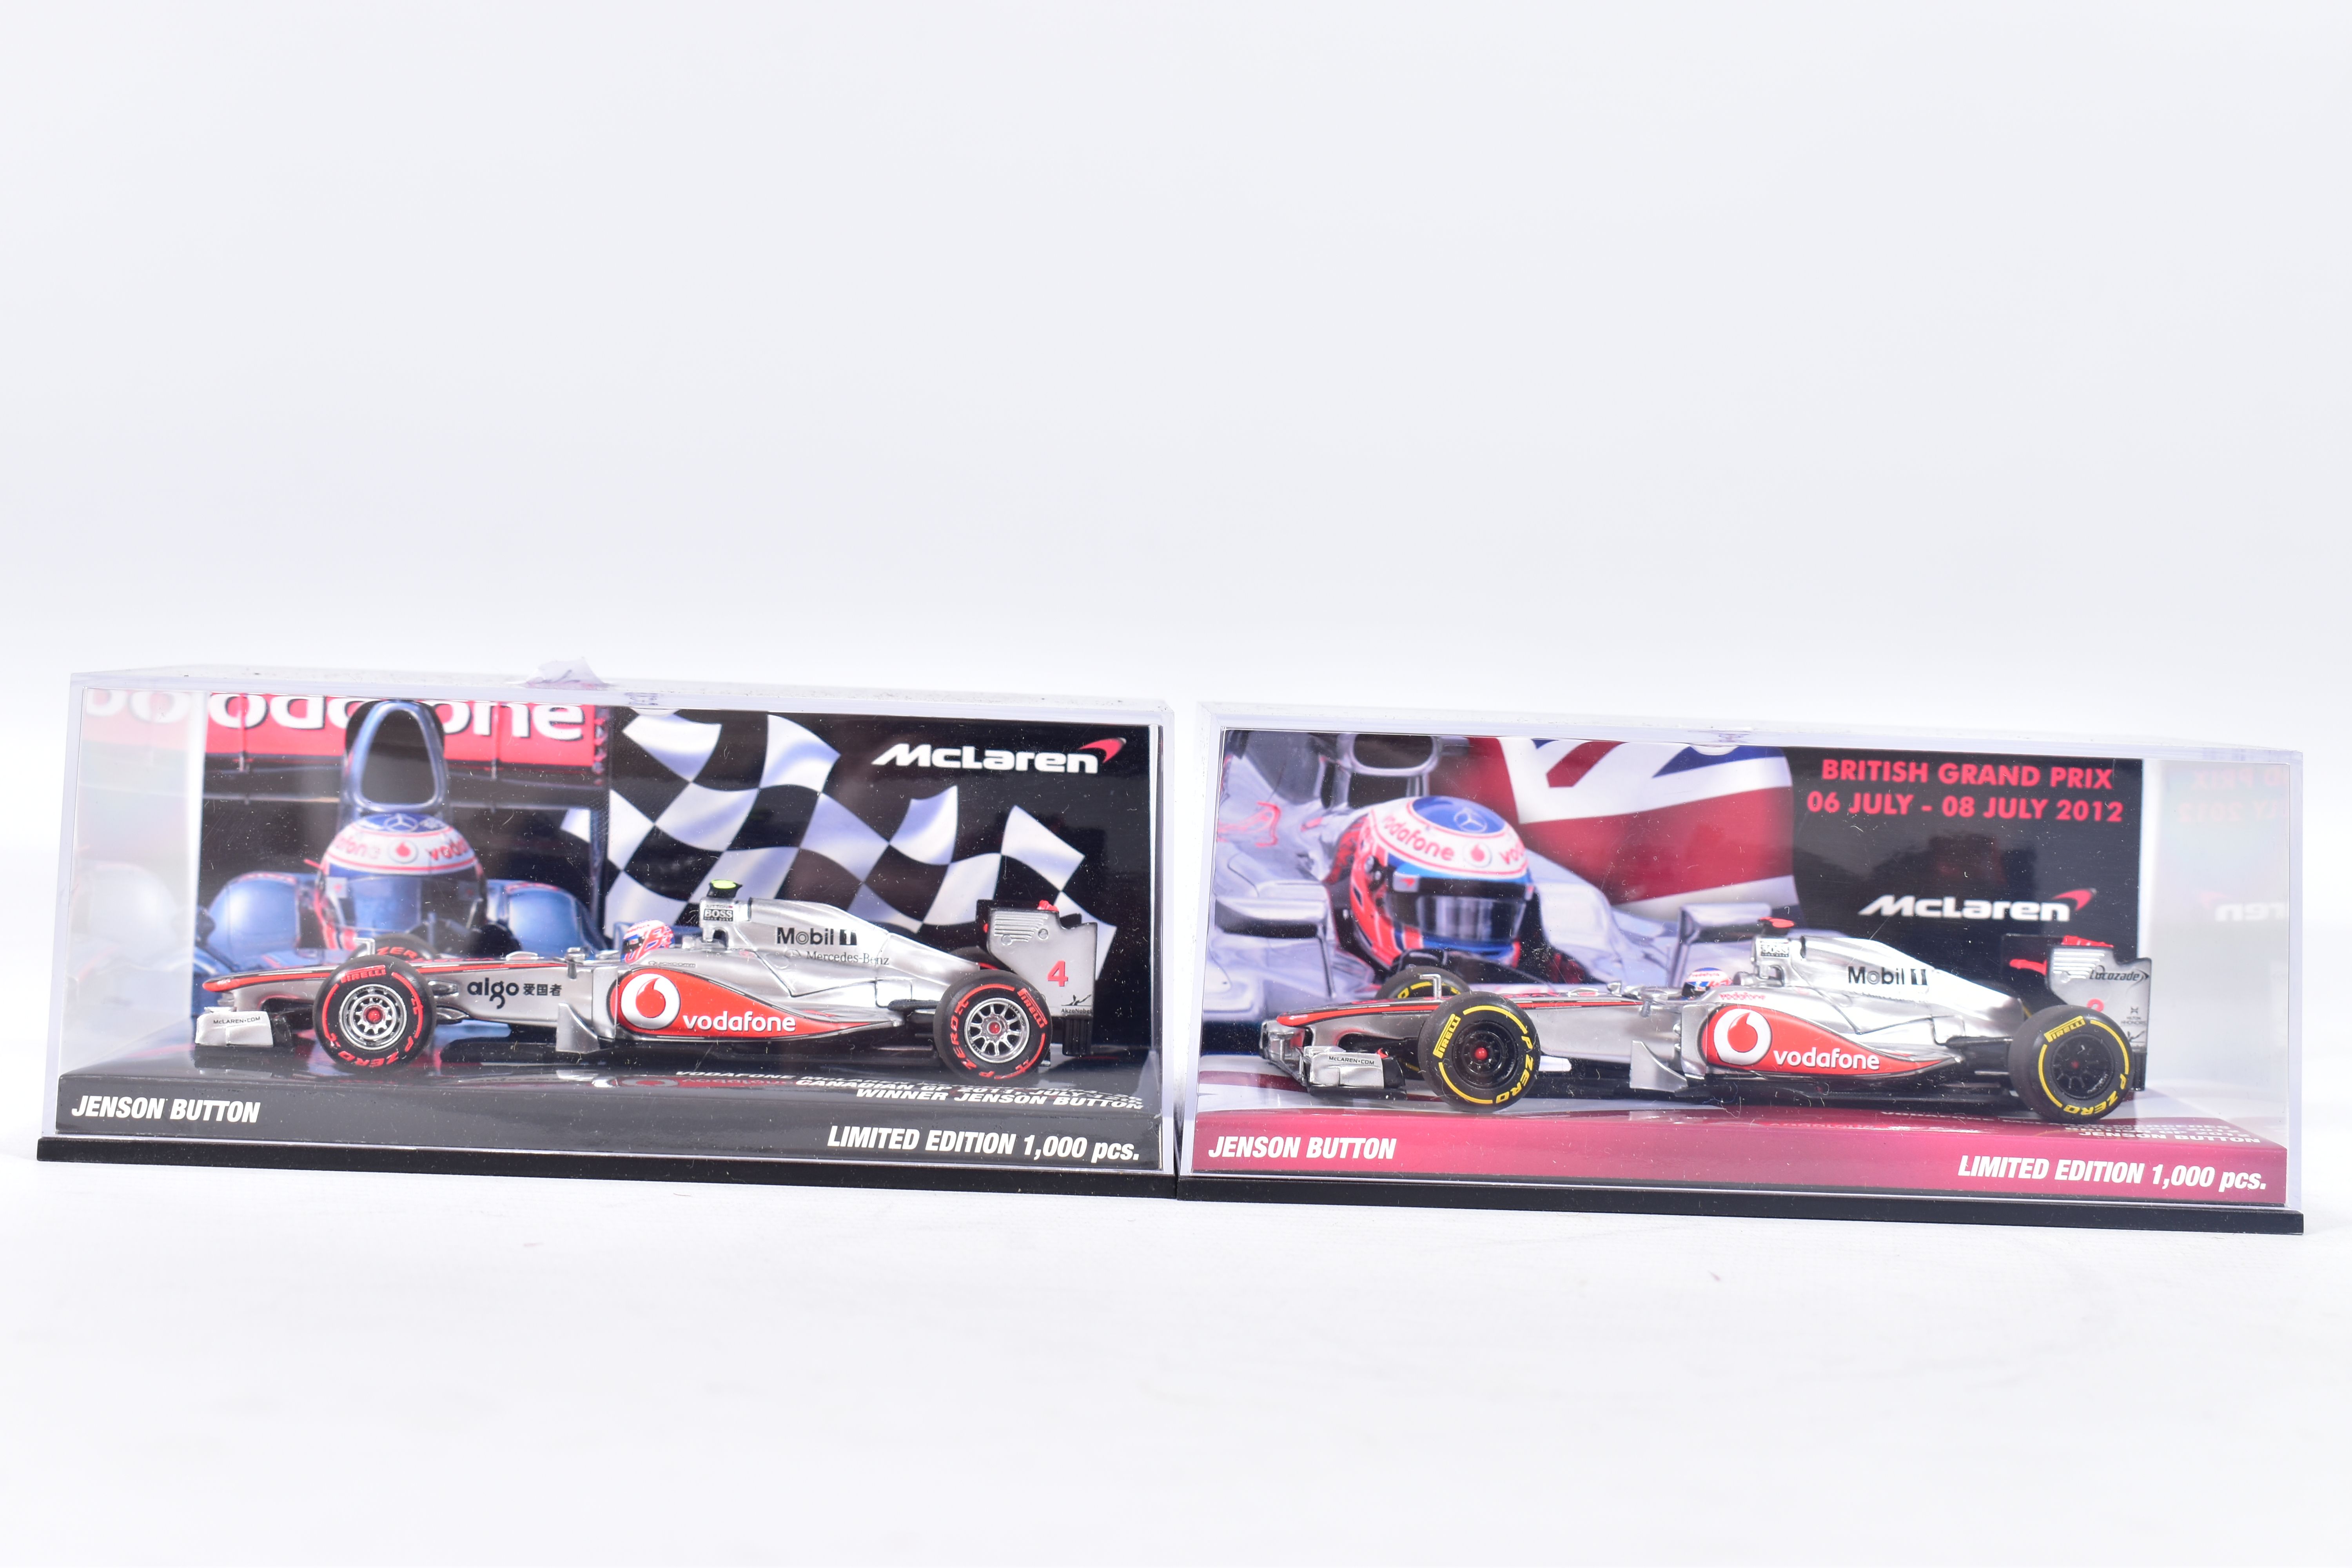 TEN BOXED ASSORTED PAUL'S MODEL ART MINICHAMPS 1:43 SCALE DIECAST F1 RACING CAR MODELS, all are - Image 6 of 6